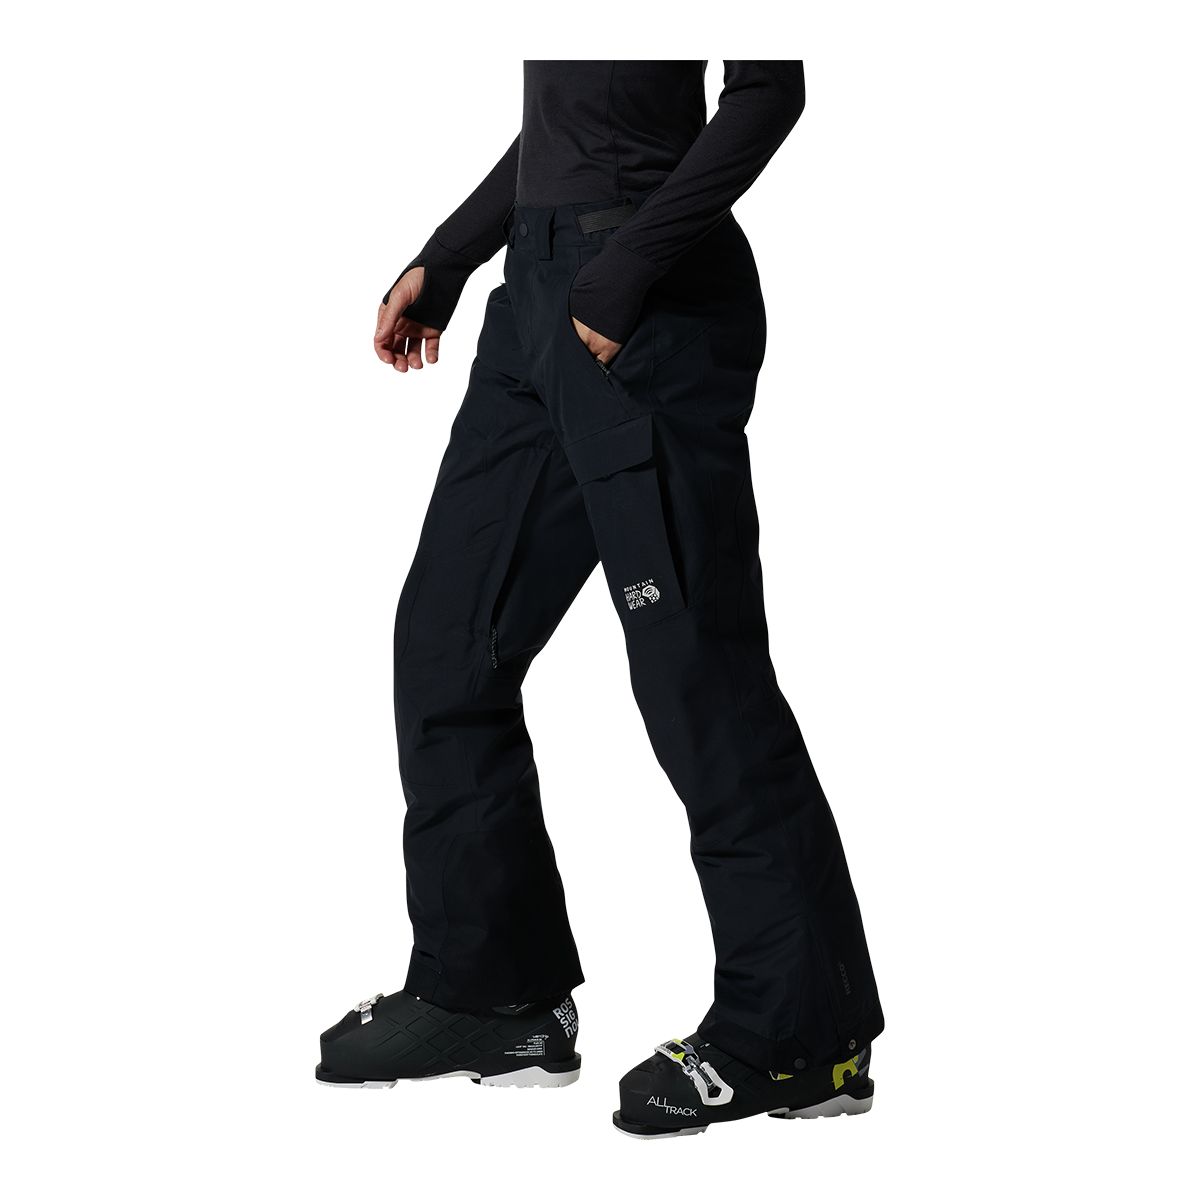 keusn thermal trousers for women crew neck lined thermal pants